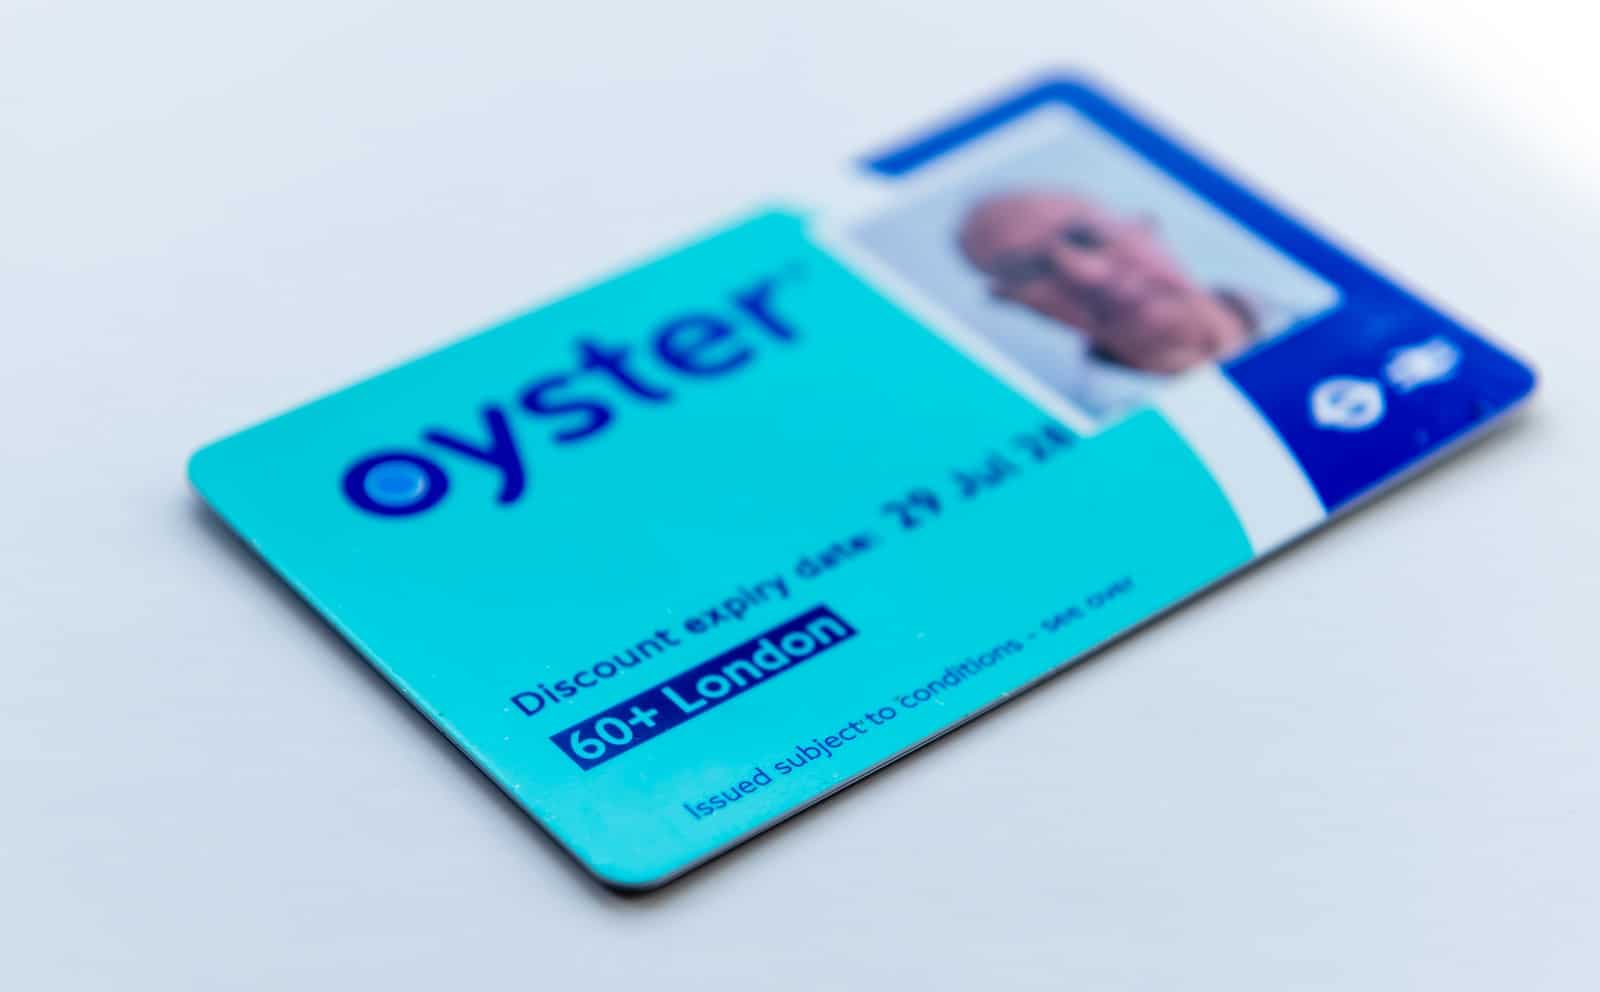 Image Credit: Shutterstock / Yau Ming Low <p>The 60+ Oyster scheme, which gives free travel to Londoners over the age of 60, differs from the Freedom Pass scheme, which uses council tax funds to give free travel to those over 66.</p>